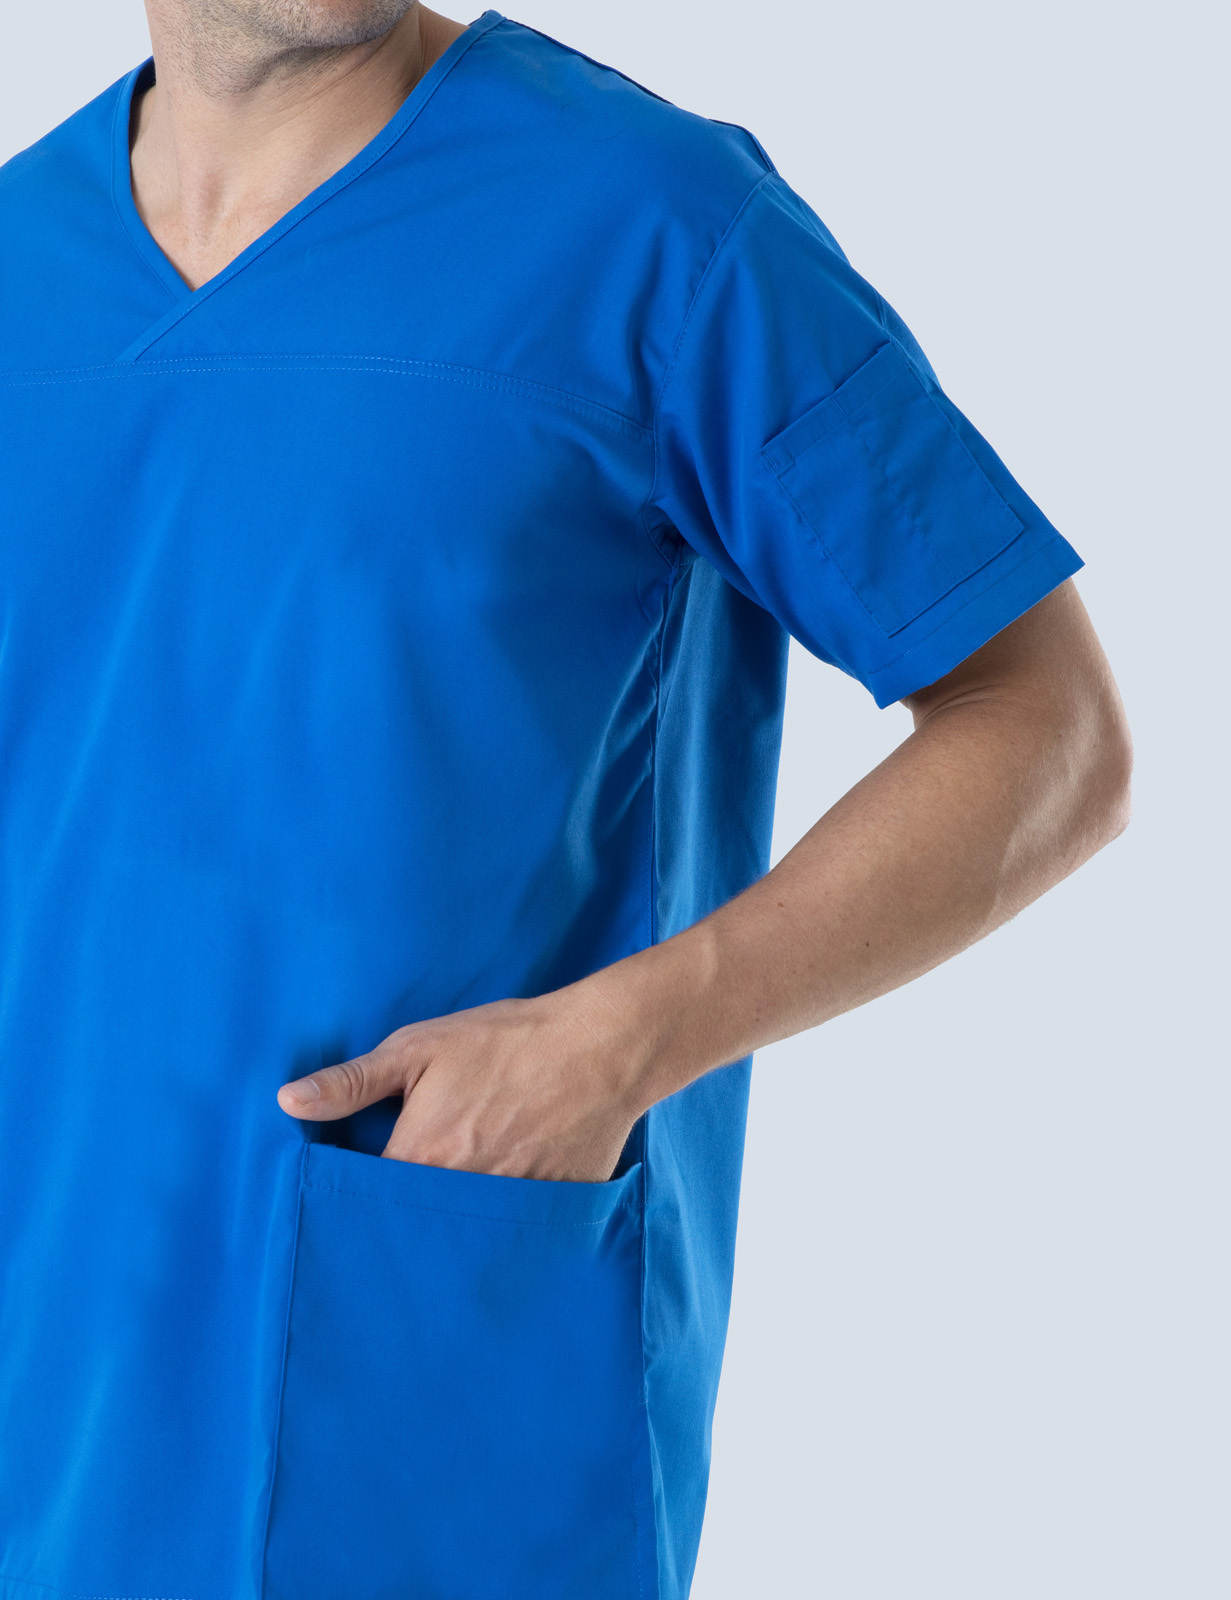 Men's Fit Solid Scrub Top - Royal - 3X Large - 1